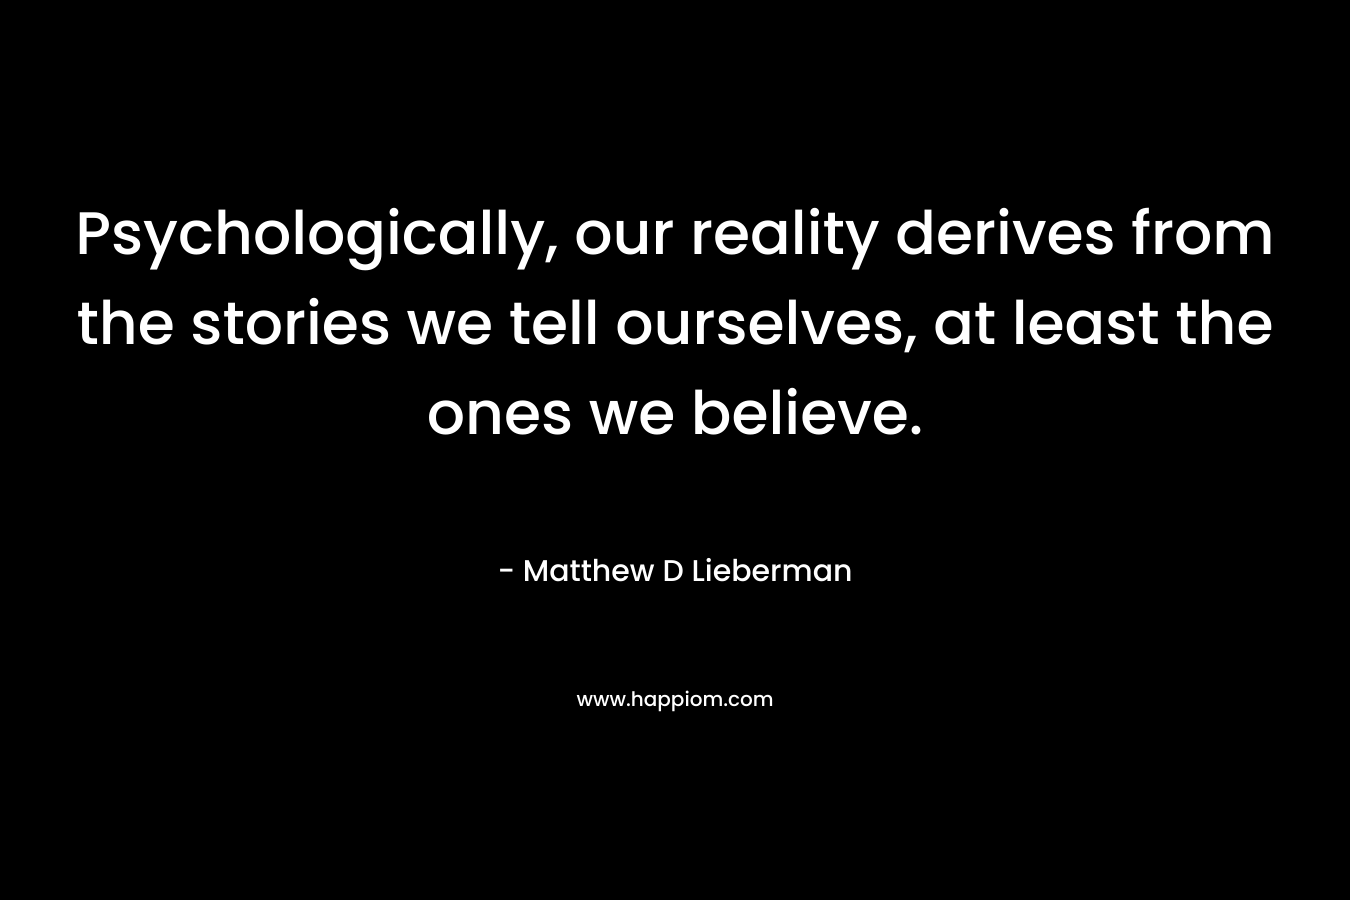 Psychologically, our reality derives from the stories we tell ourselves, at least the ones we believe.